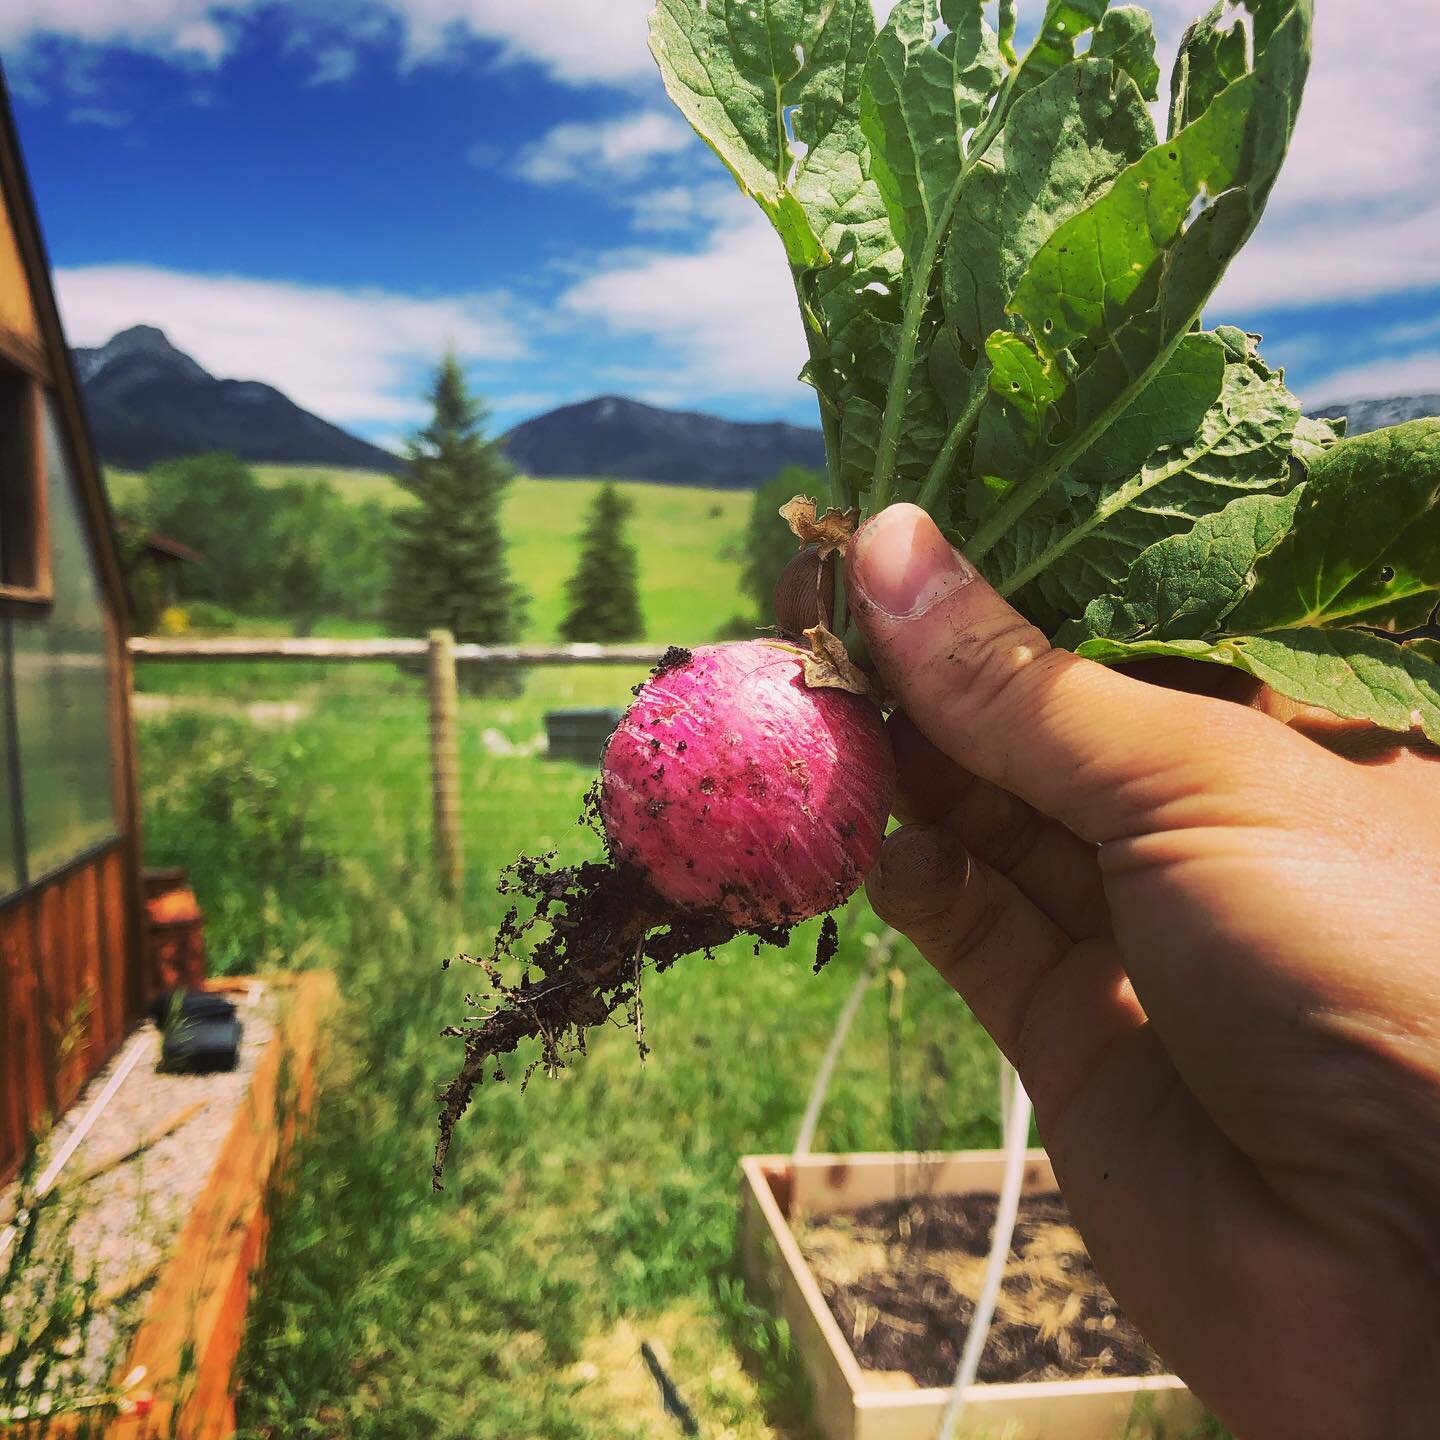 Another year, another Radish.  First vegetable harvest of the year!

#Montana #bozeman #bzn #gardening #garden #radish #gardenradish #montanagardening #montanagarden #backyardgardener #backyardgarden #backyardgardening